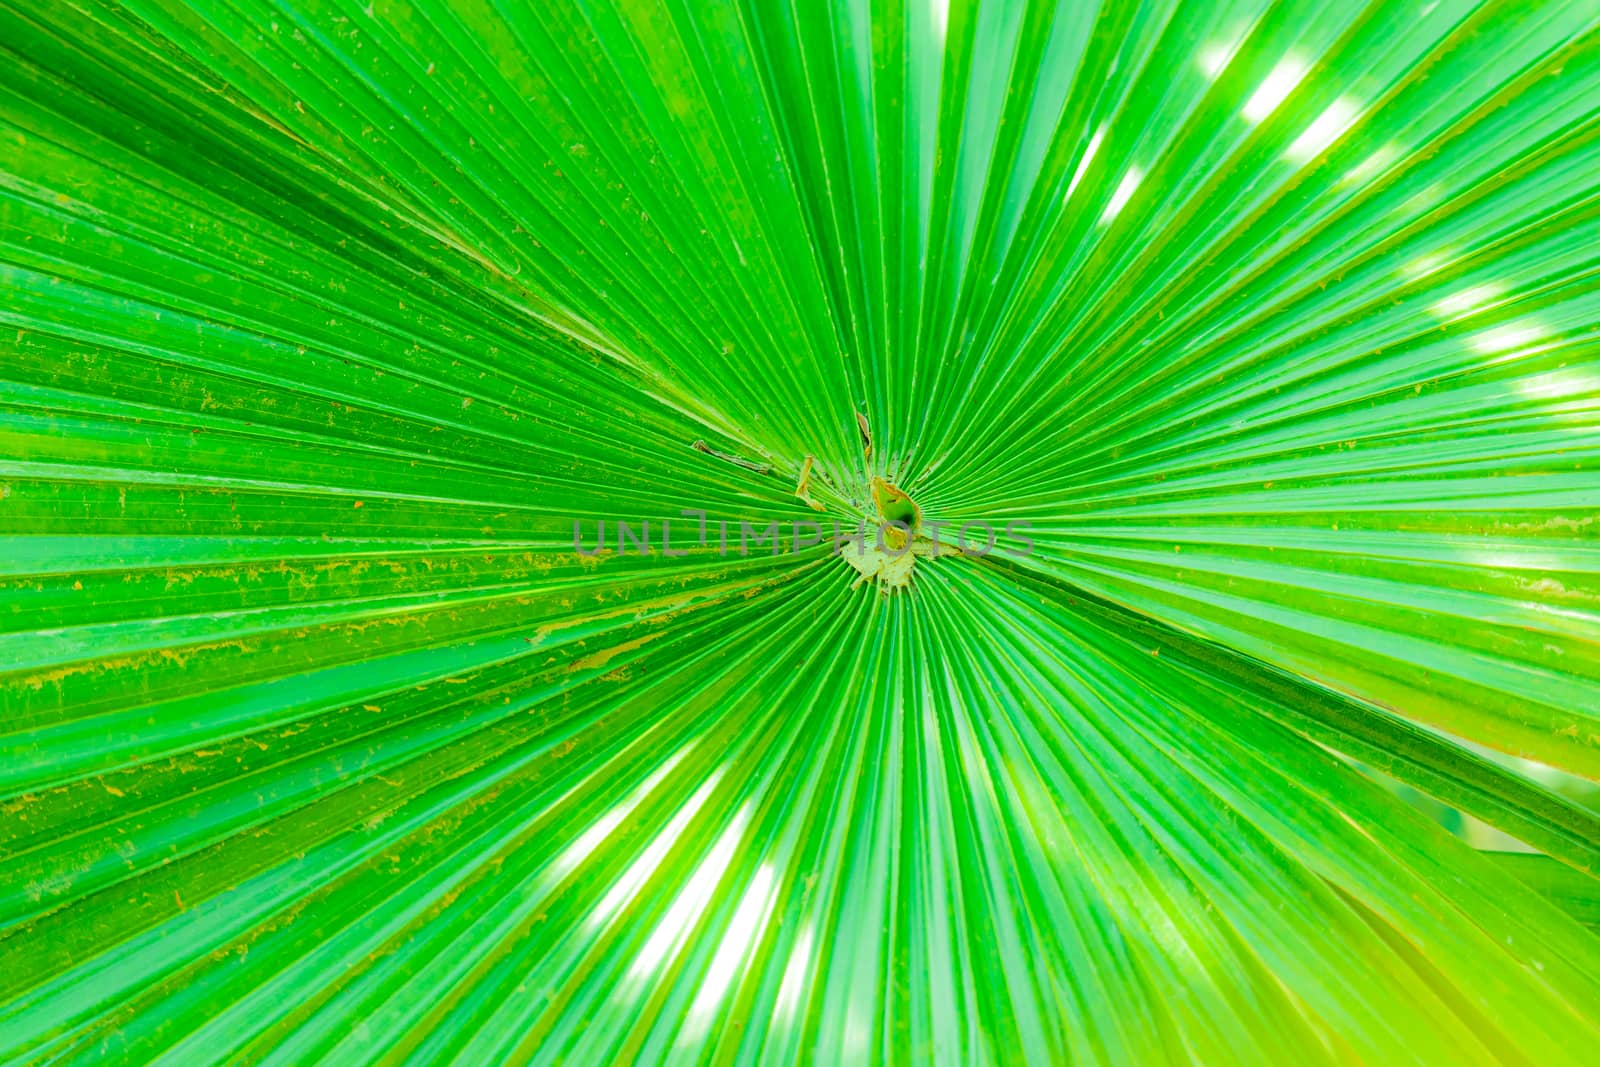 The beautiful green leaf of the palm tree and its lined pattern and texture are made